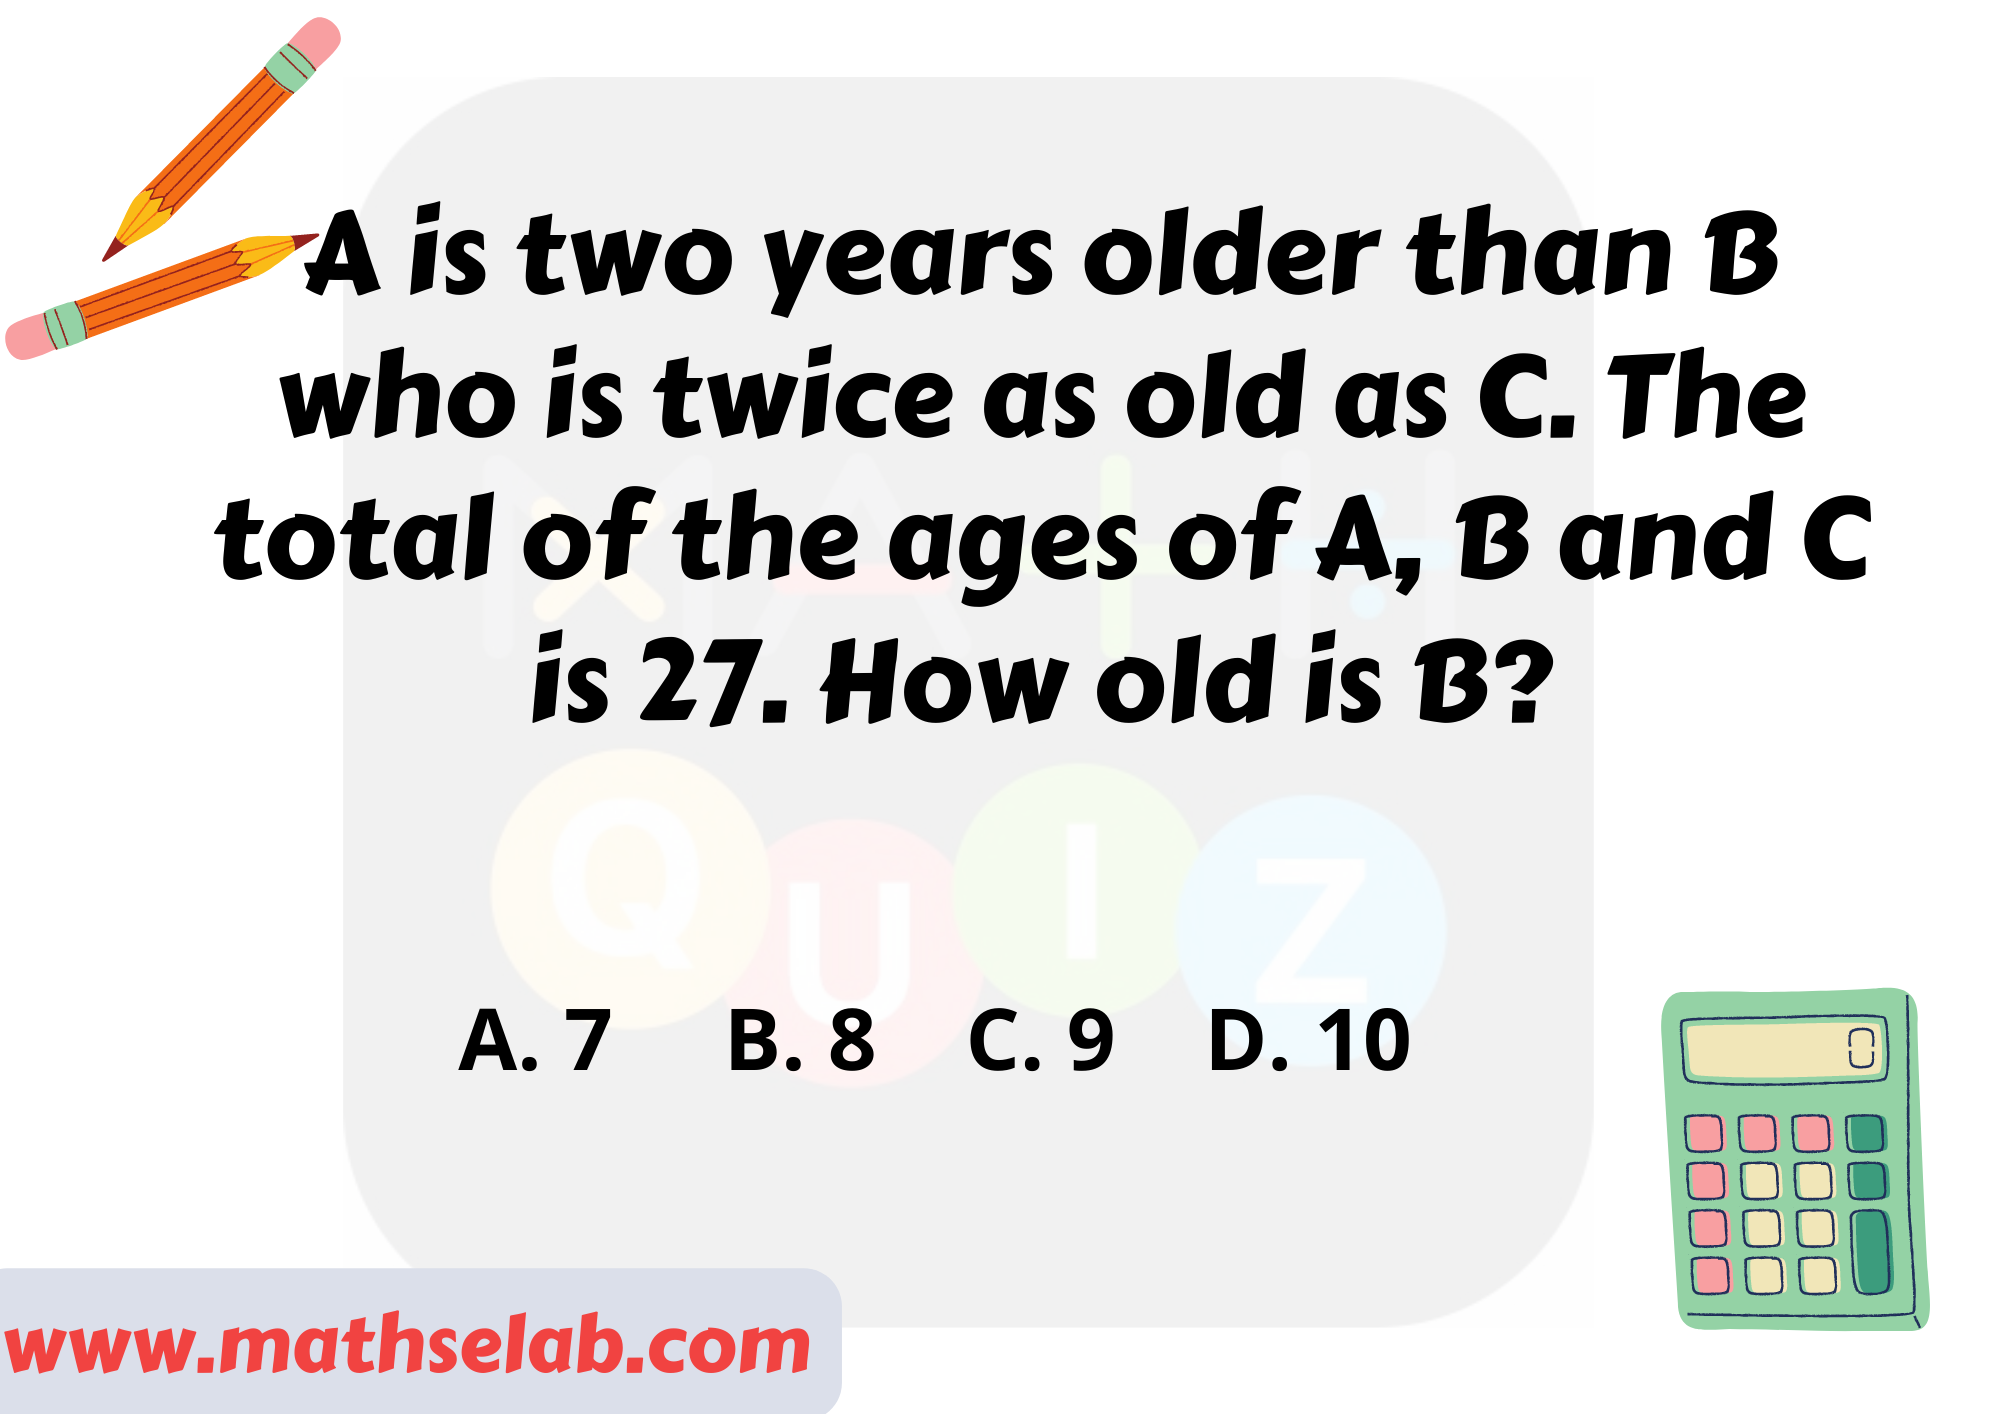 A is two years older than B who is twice as old as C. The total of the ages of A, B and C is 27. How old is B?